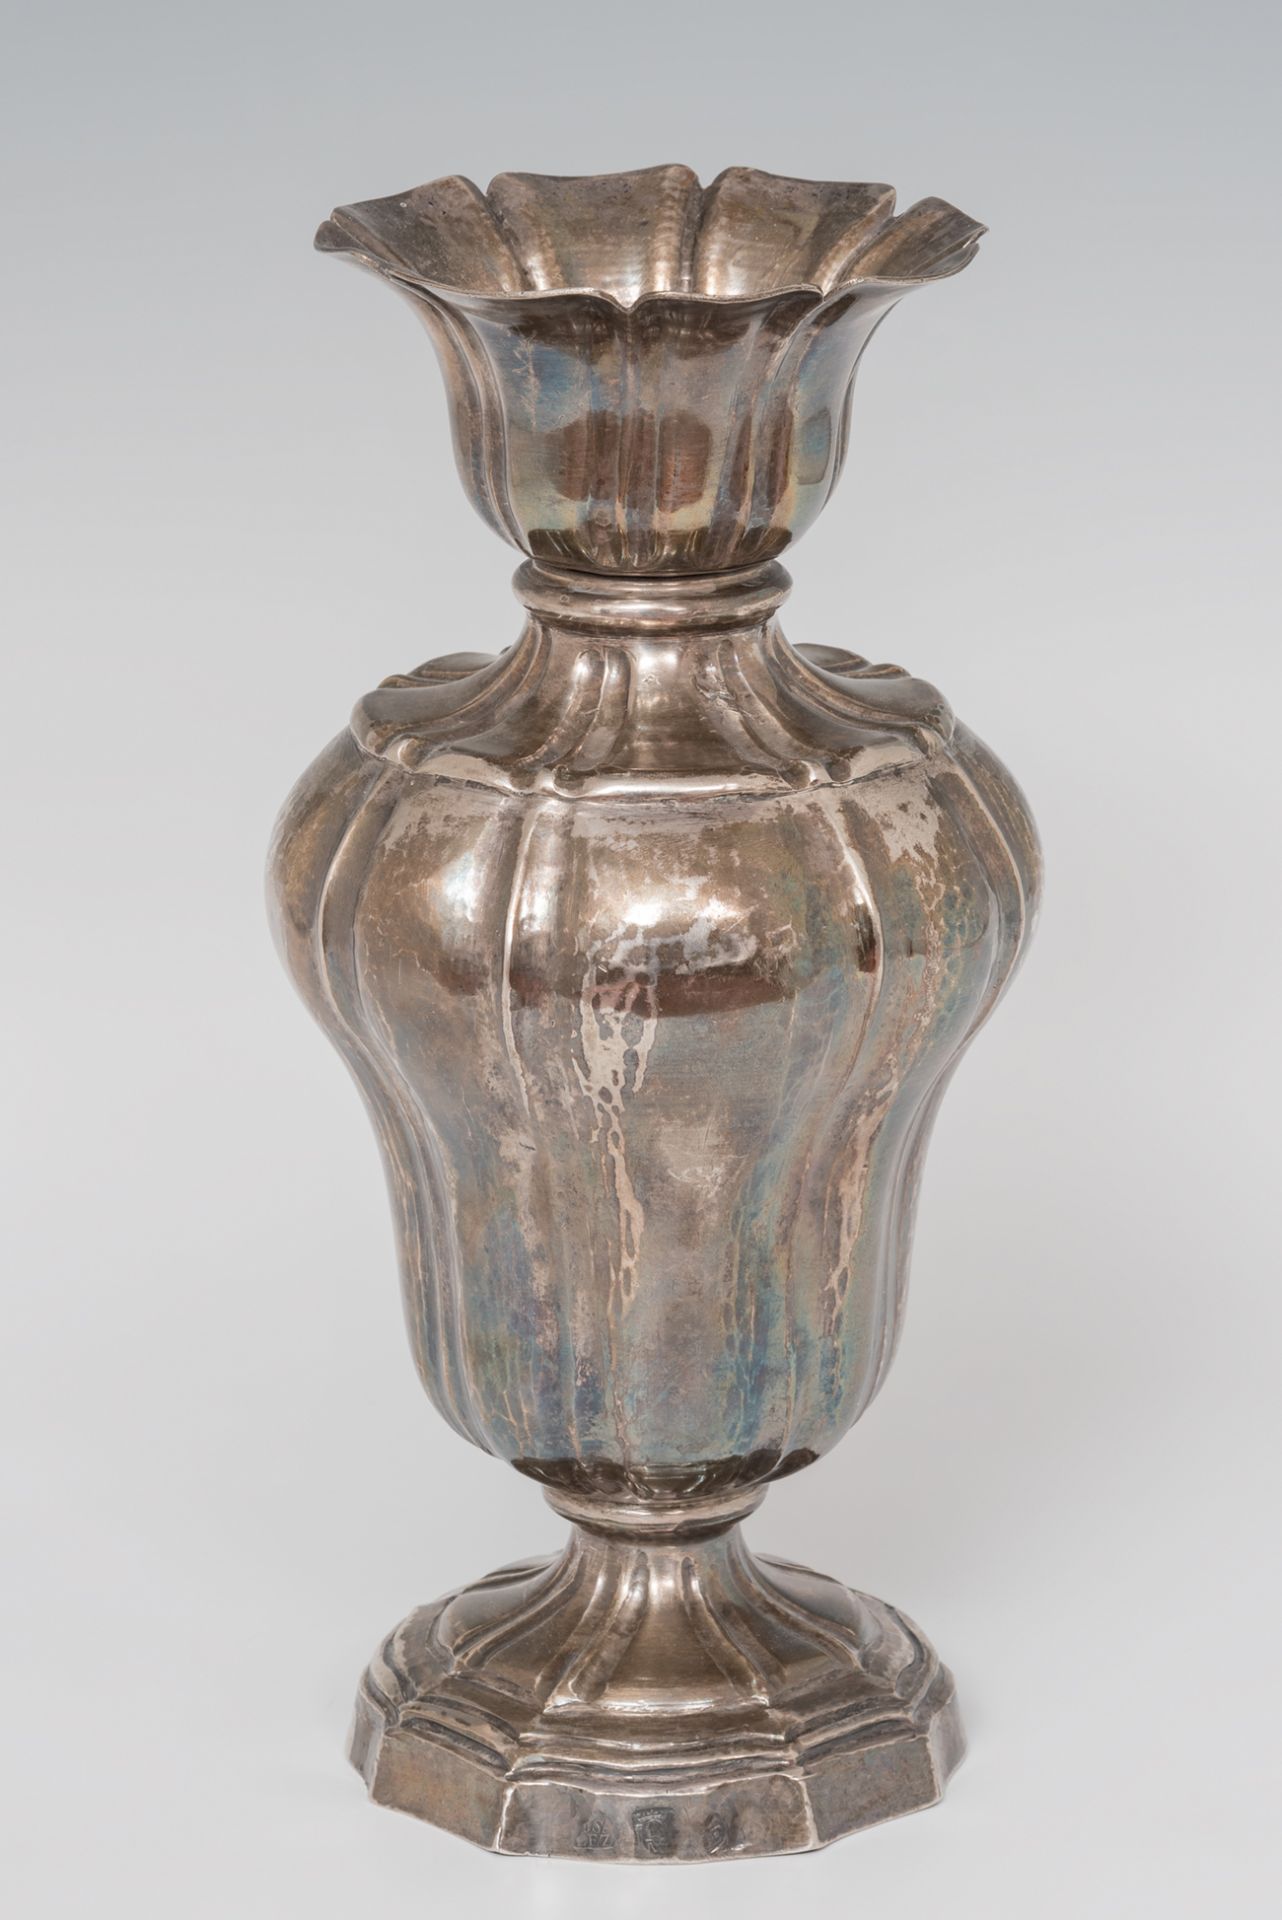 Altar vase in stamped silver. Mexico. 18th centuryWeight: 968.5 g. Measure: 27.5 x 14 cm.Vase